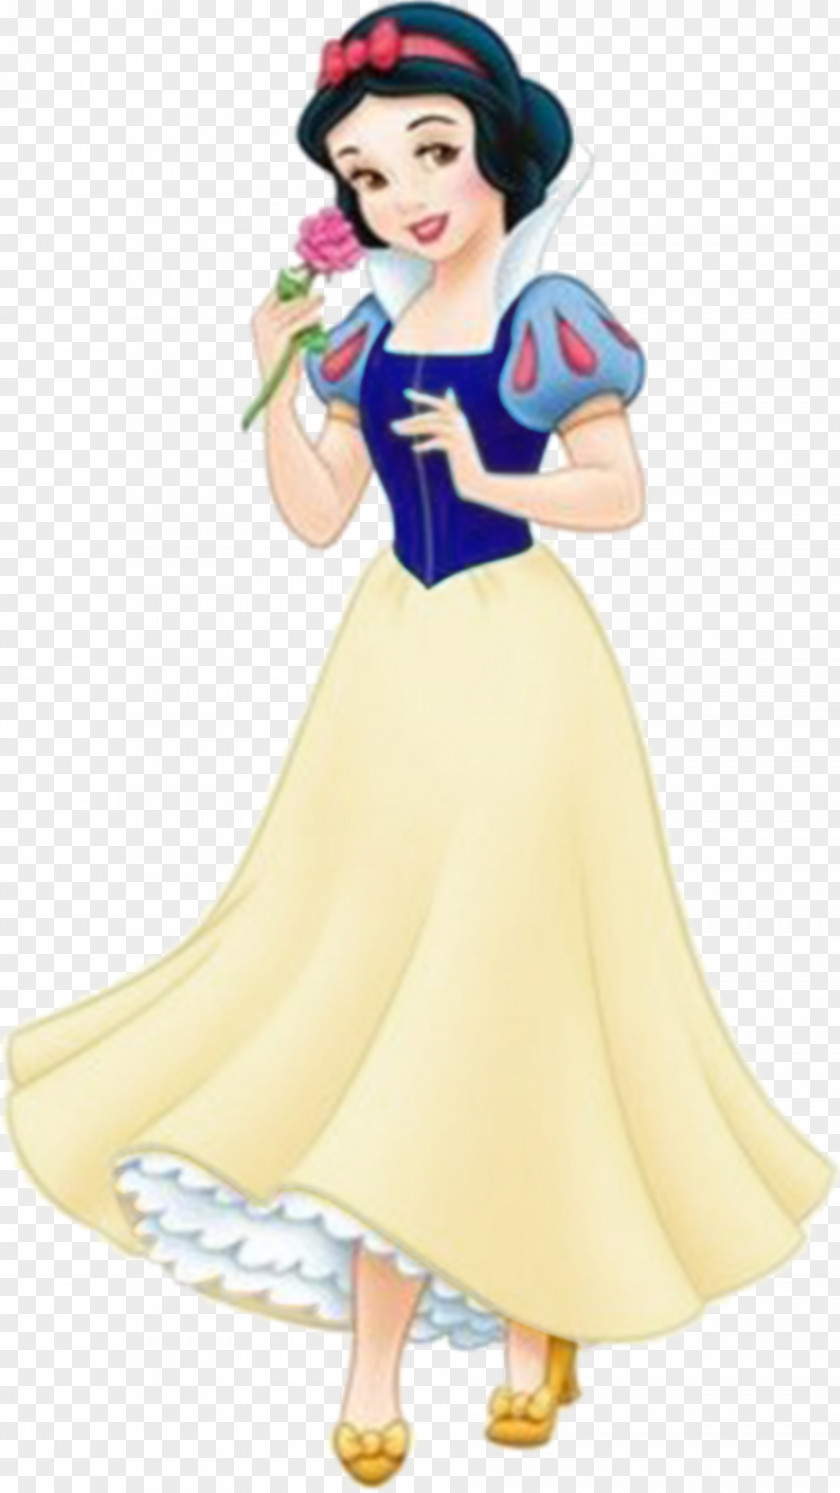 Snow White And The Seven Dwarfs Rapunzel Cinderella Tiana PNG